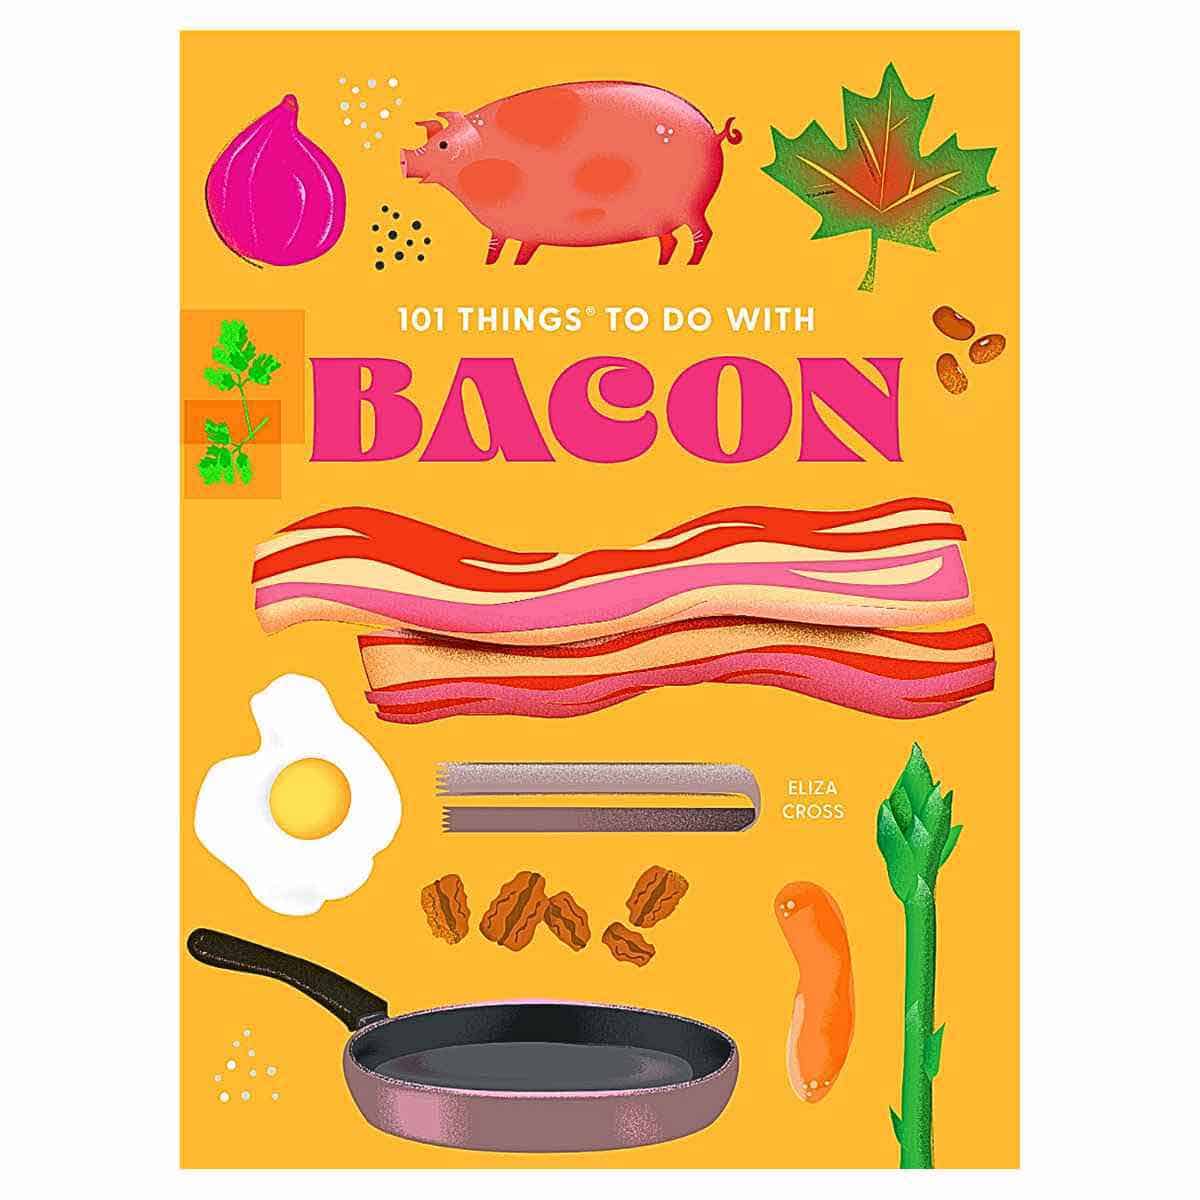 The cover of the cookbook "101 Things To Do With Bacon" by Eliza Cross.